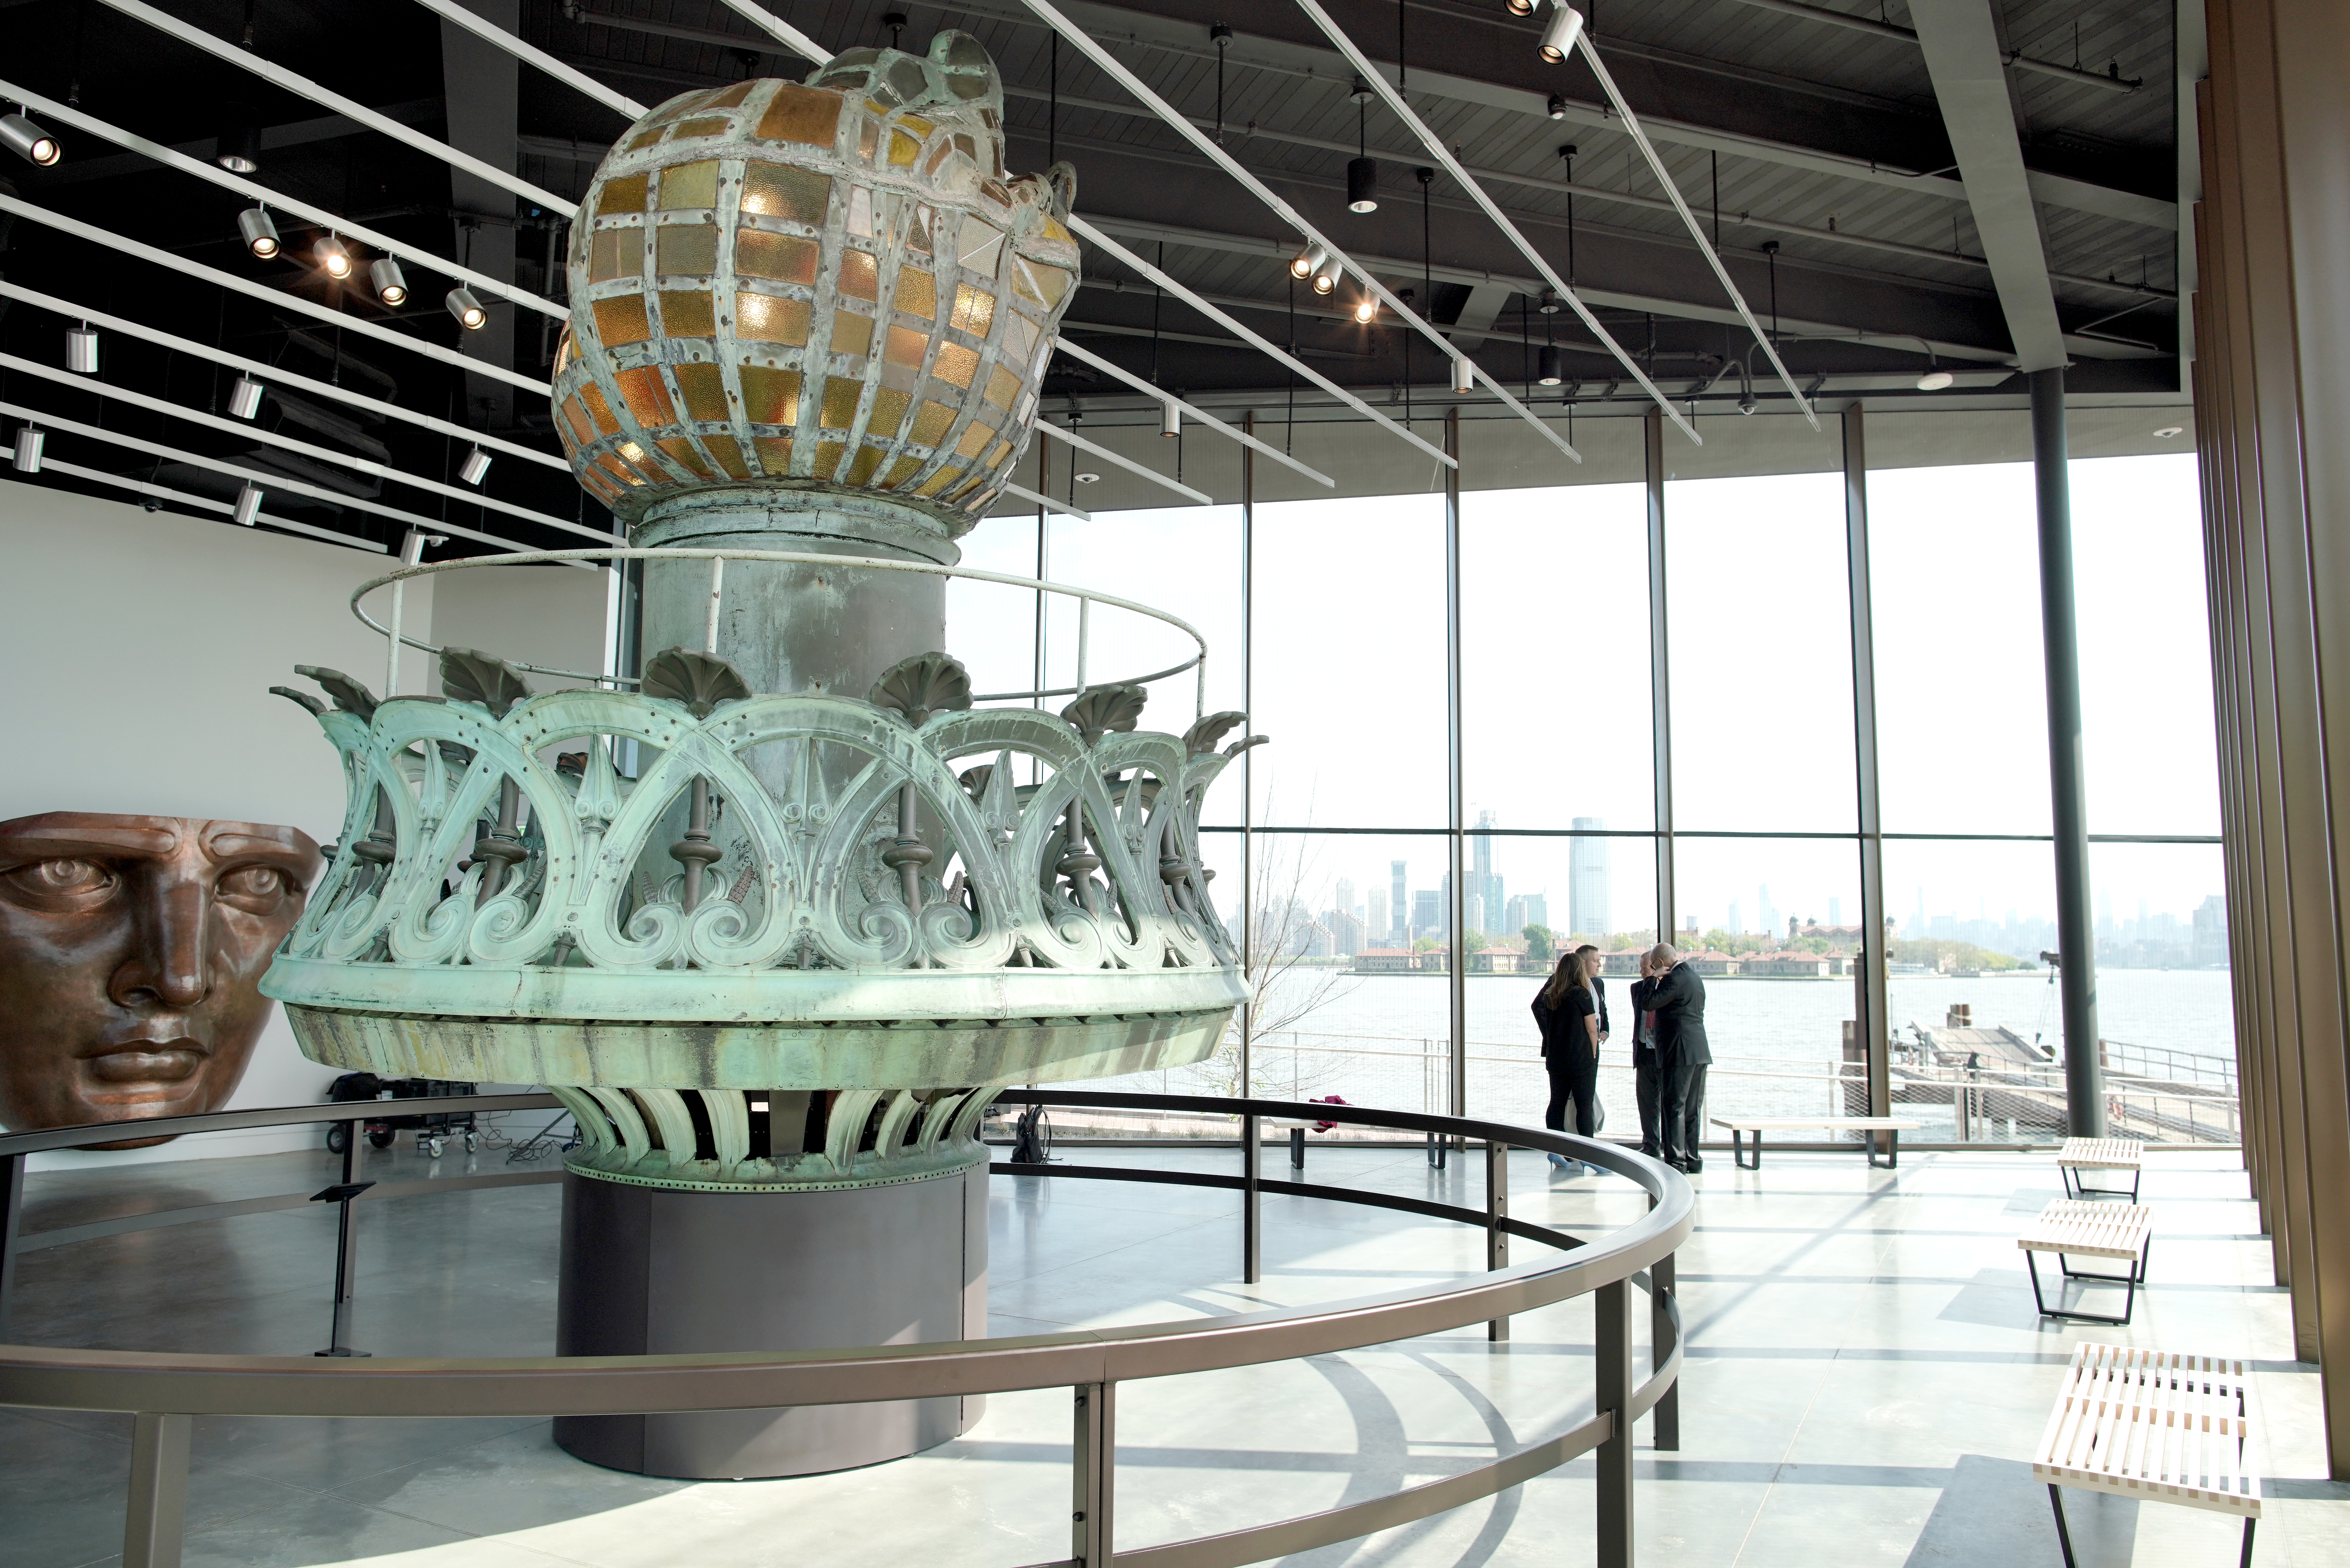 Inside the Statue of Liberty Museum where the original torch sit in the center of the room